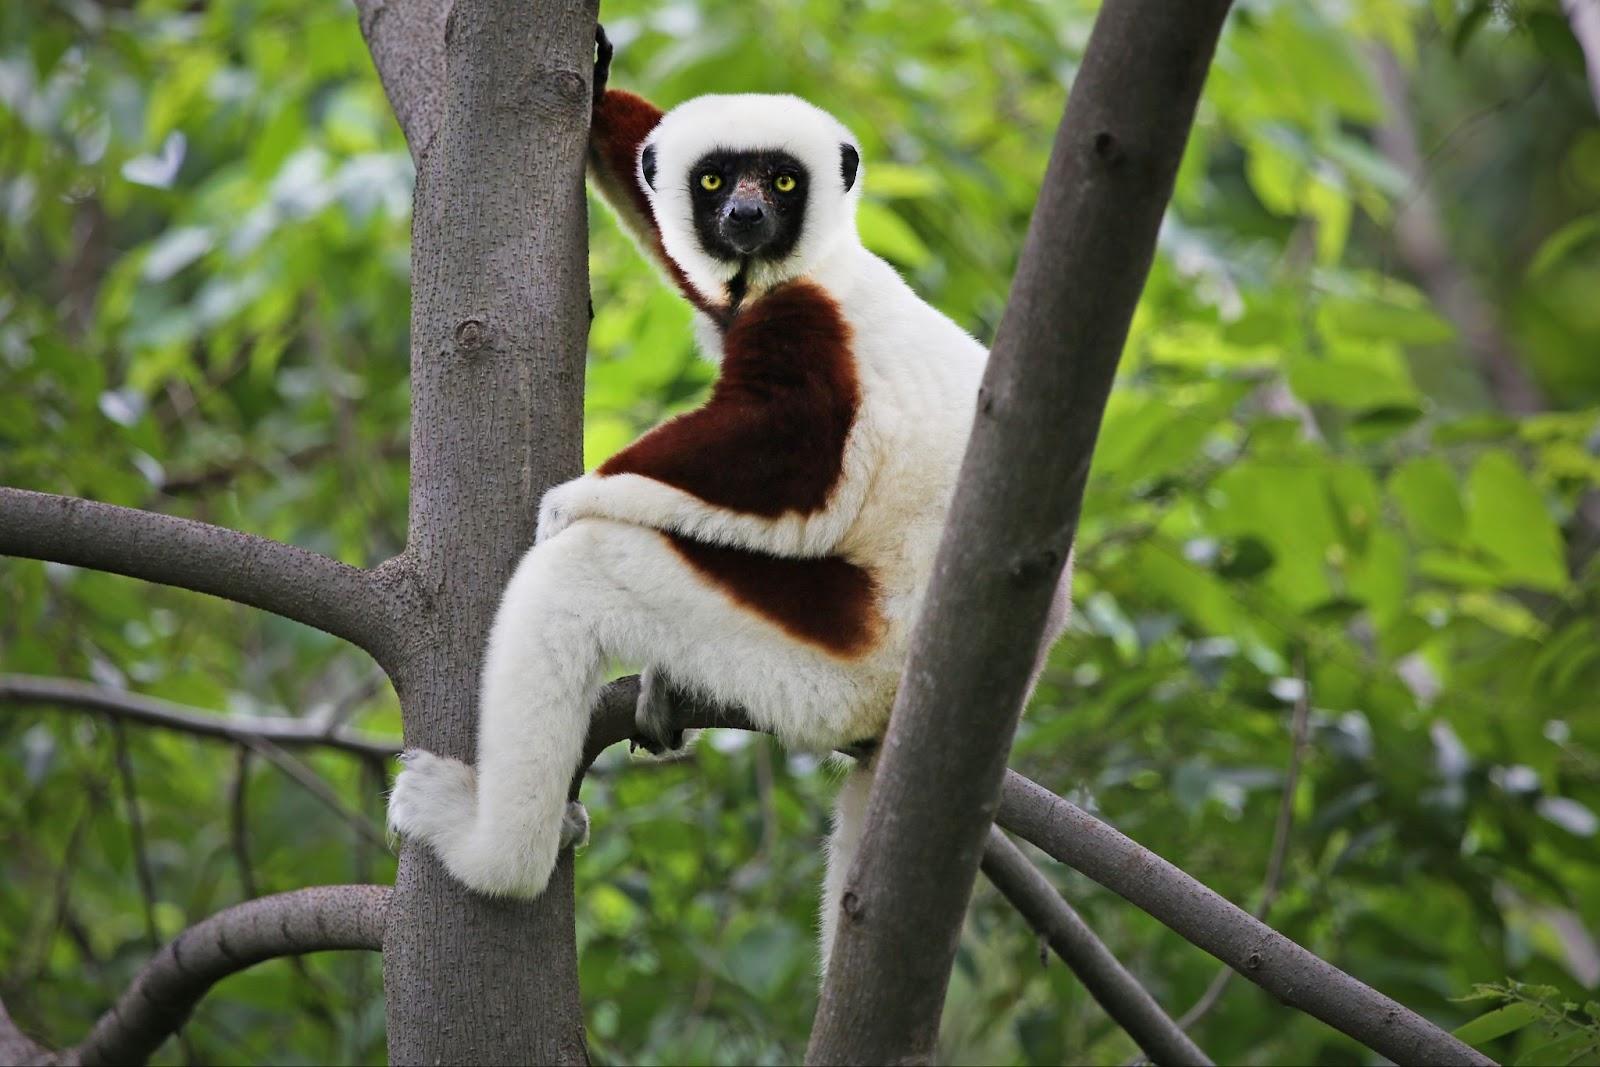 Endangered Coquerel's Sifaka (Propithecus coquereli) rests and looks in a tree in a rain forest in Madagascar